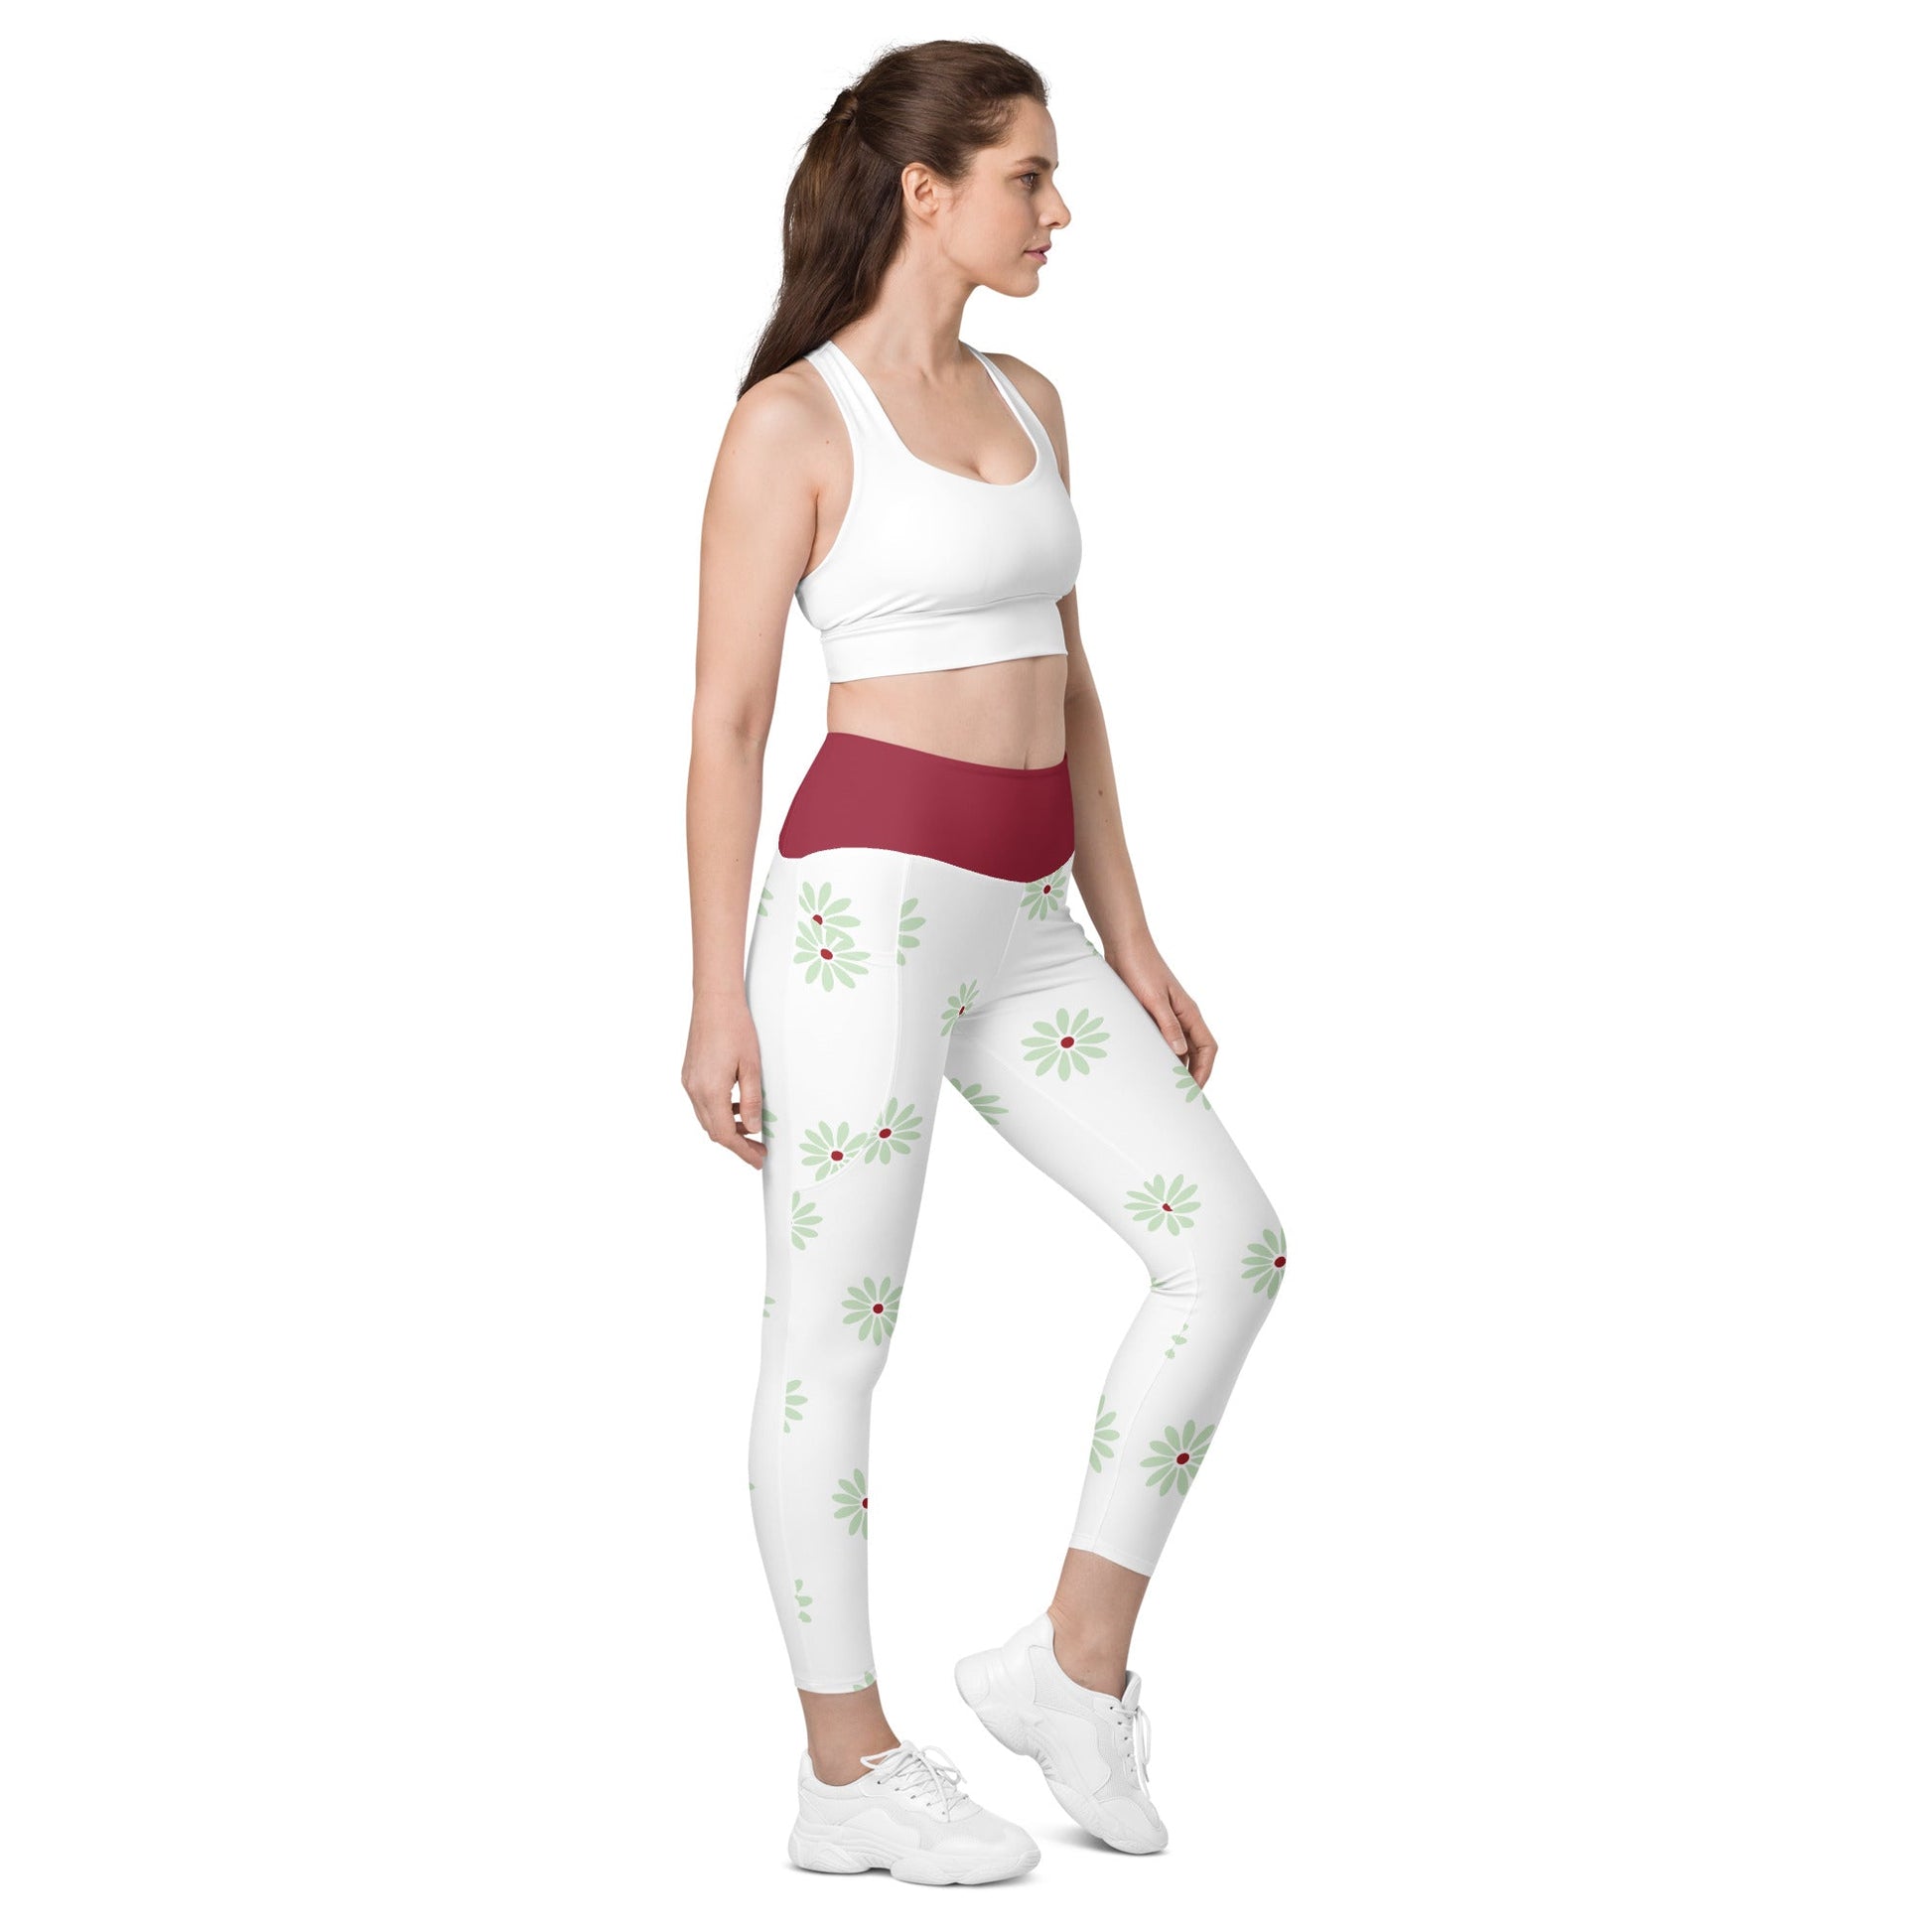 Tightrope Walker Leggings with pockets